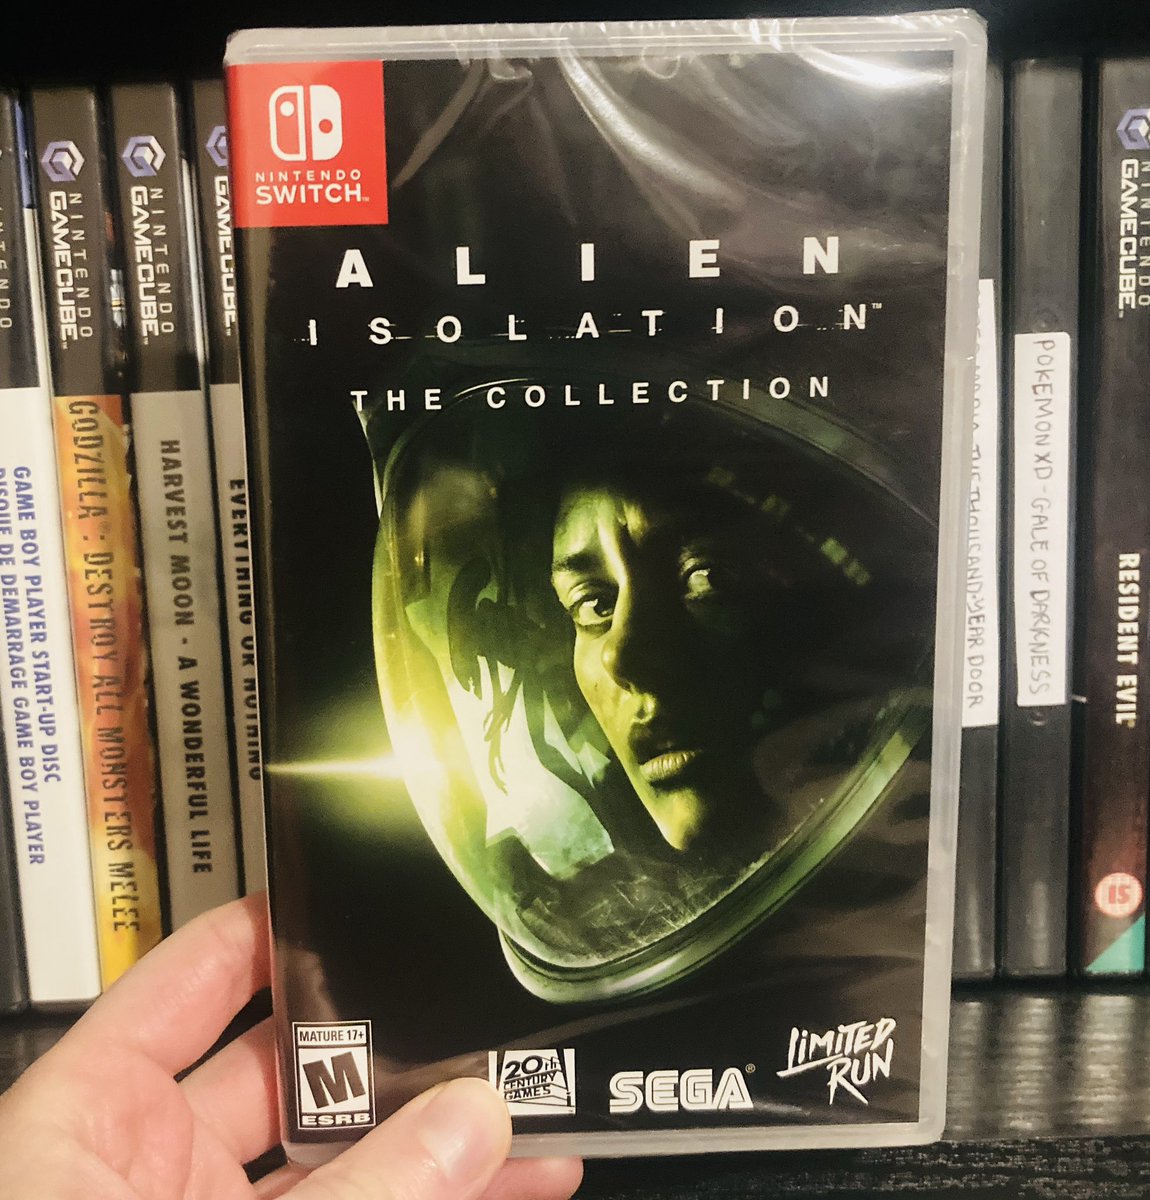 Alien Isolation on the Switch arrived from Limited Run games. #alien #Nintendo #nintendoswitch